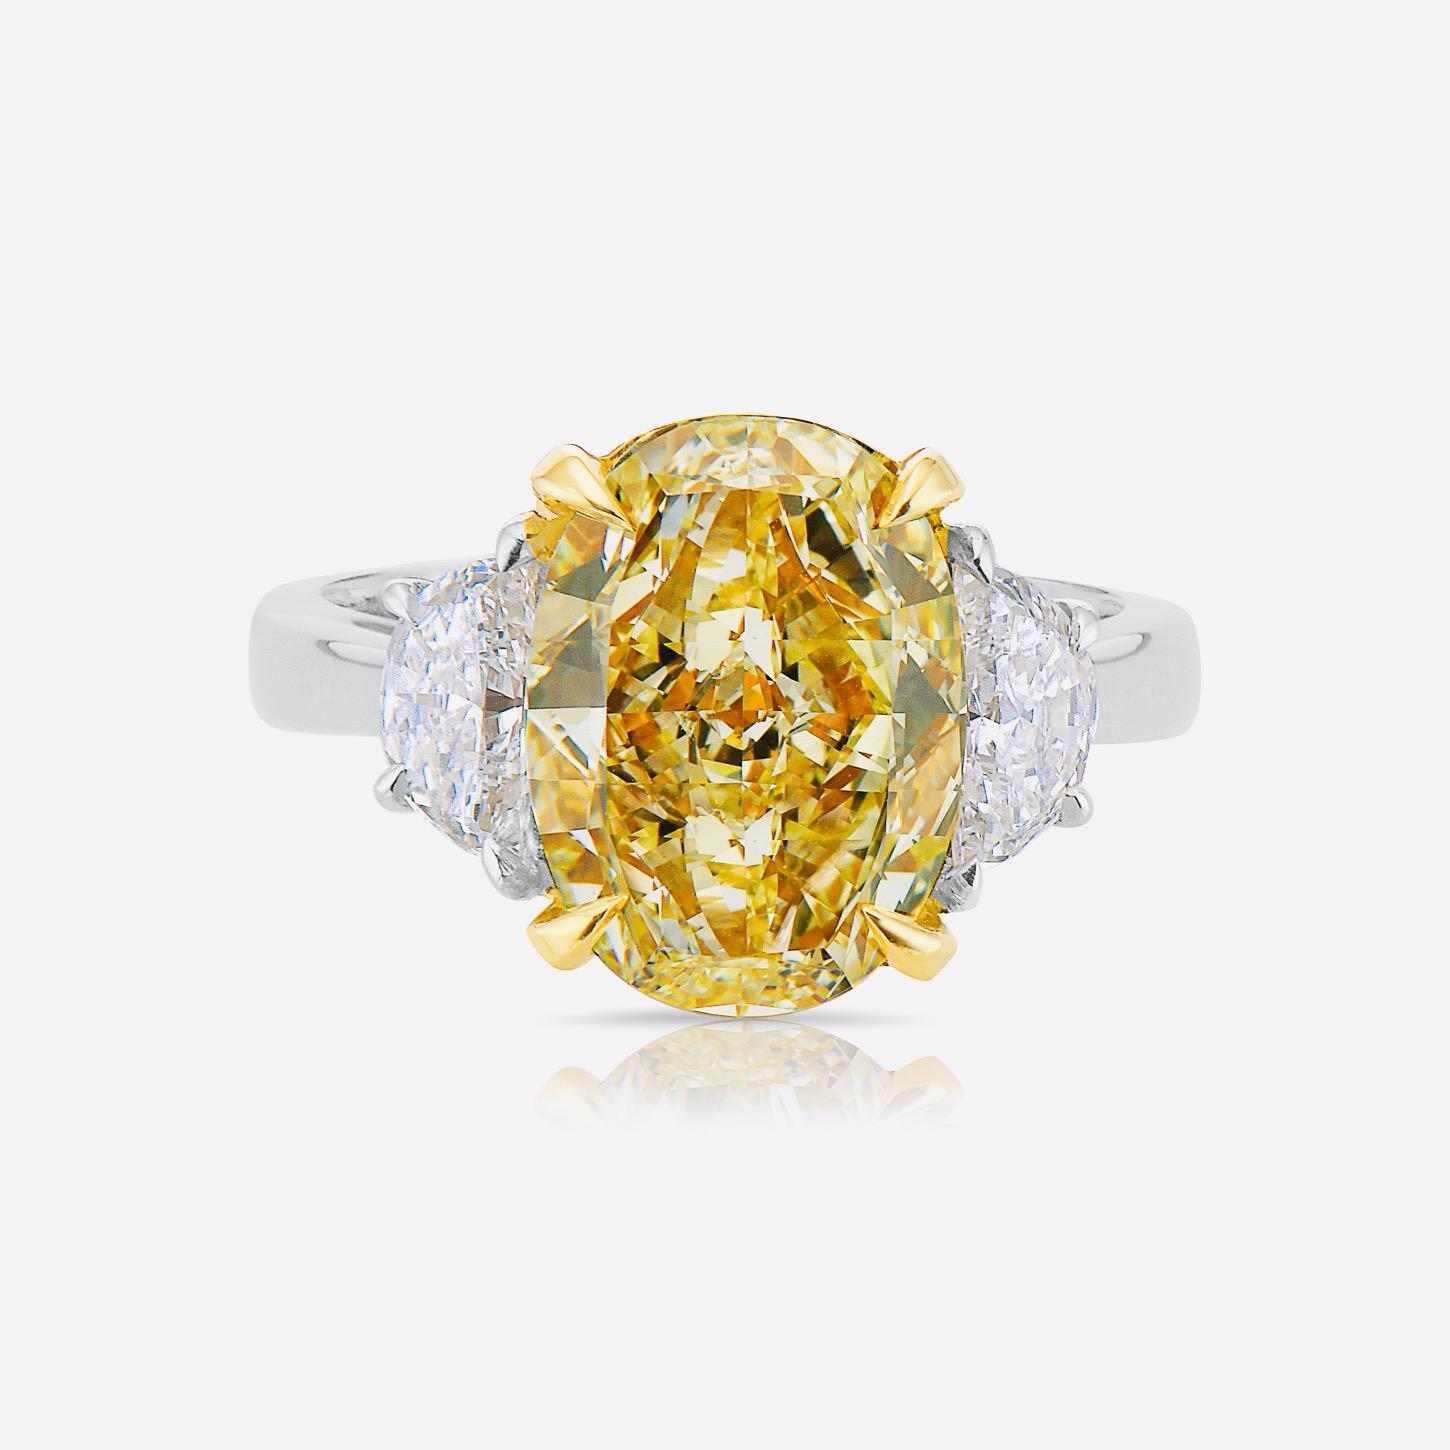 From The Vault at Emilio Jewelry Located on New York's iconic Fifth Avenue,
Showcasing a very special and rare Gia certified natural OVAL CUT fancy yellow diamond weighing over 5.00 carats. Please inquire for details. 
We specialize in creating